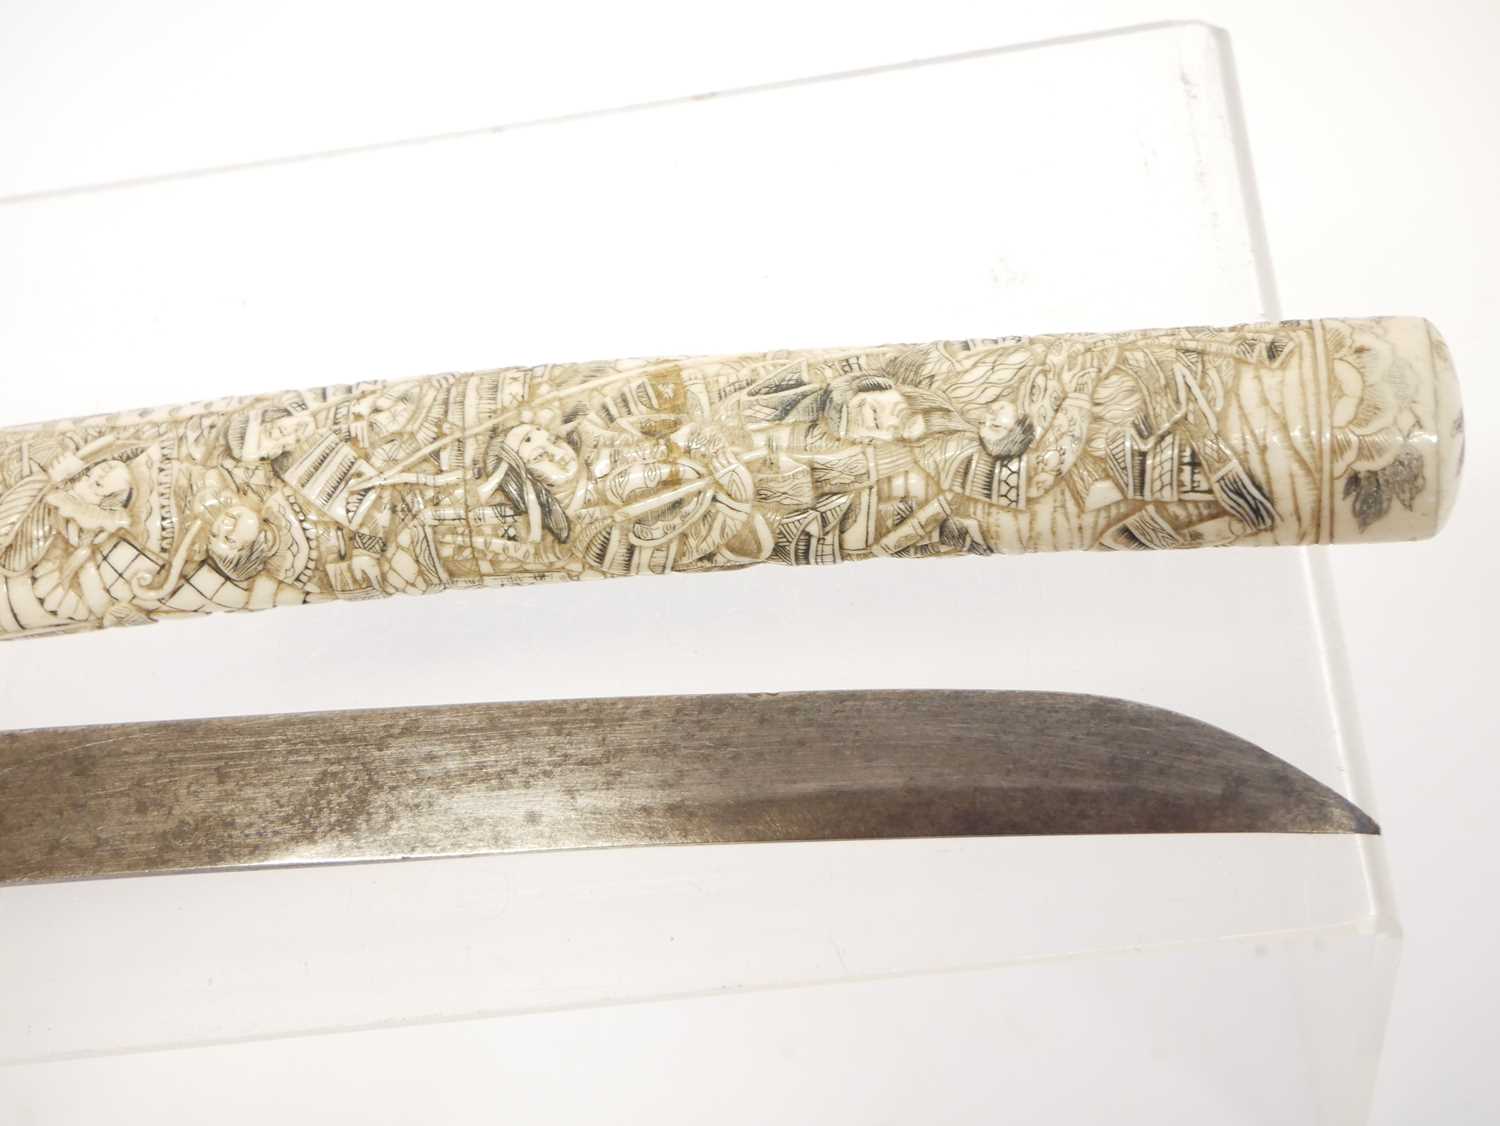 Japanese bone mounted tanto dagger, slightly curved 9.5 inch cutting edge blade, the mounts carved - Image 9 of 16